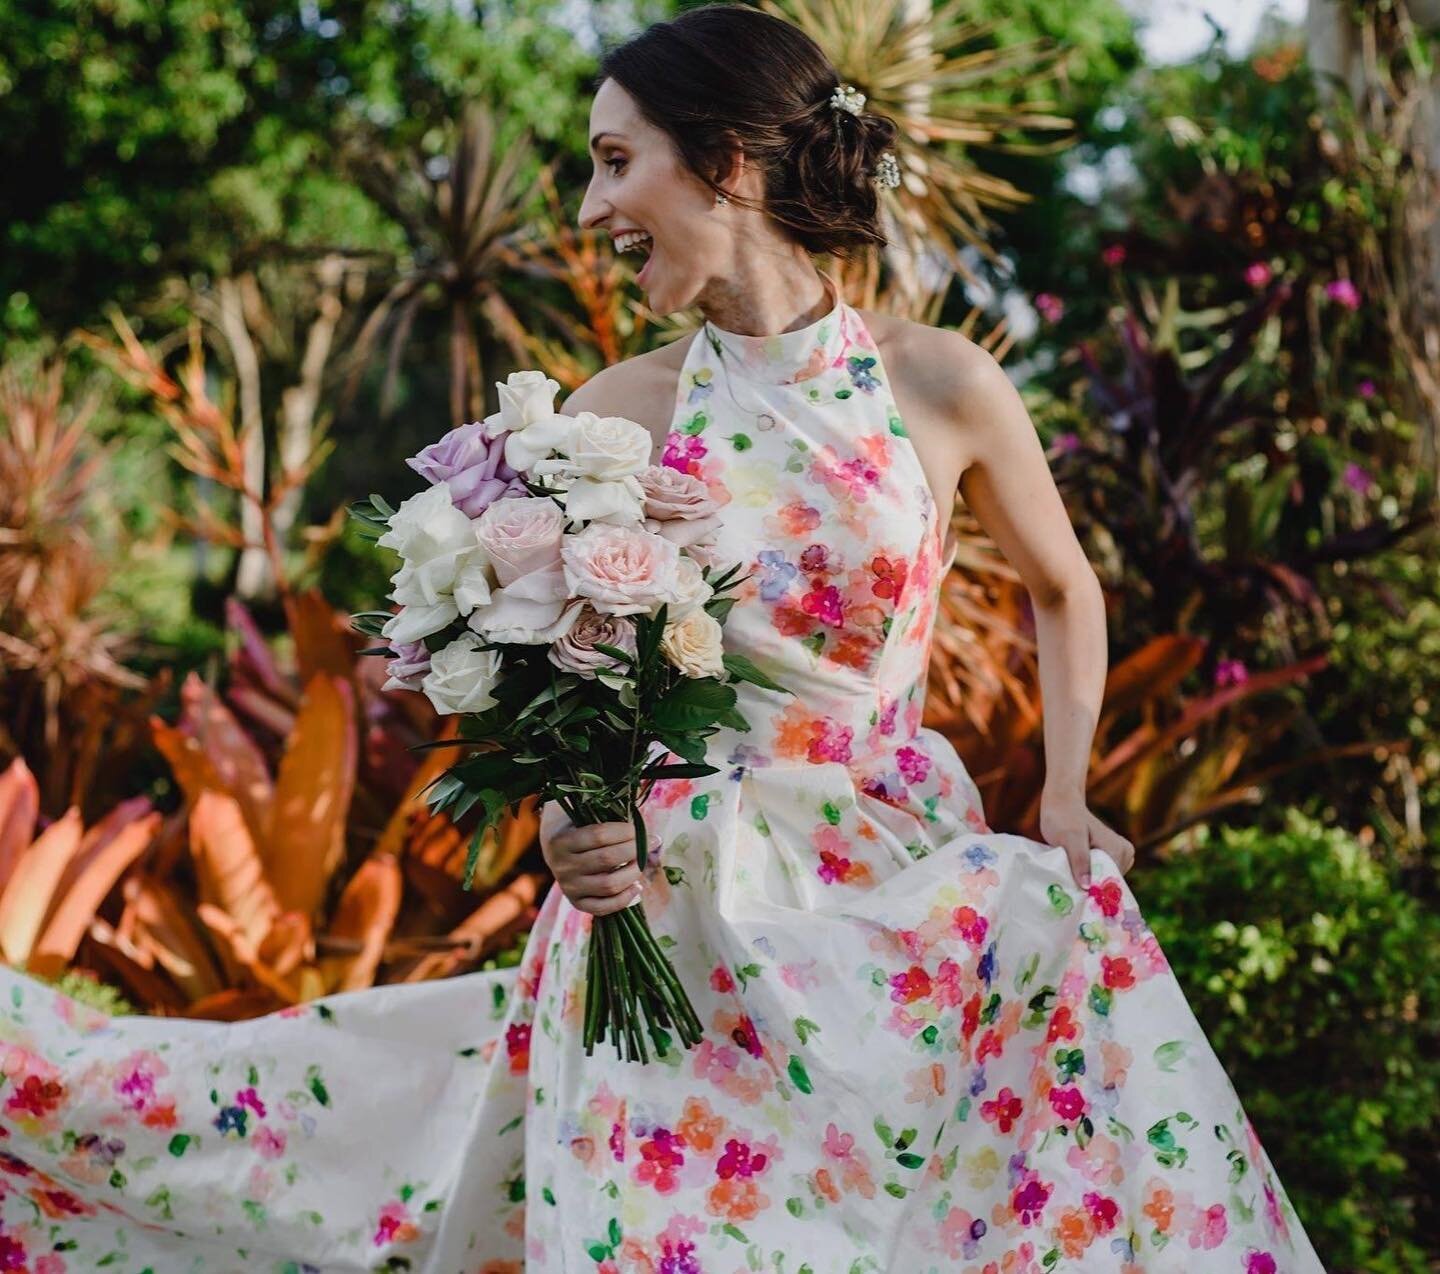 Love me some florals!
The absolutely stunning @lauren.jimmieson.craig in her custom made bridal gown by @wendymakinbridal
Hair &amp; Makeup by @jimartistry

#bride #custom #nontraditional #thebrideworeflowers #married #happy #celebrate #wedding #love